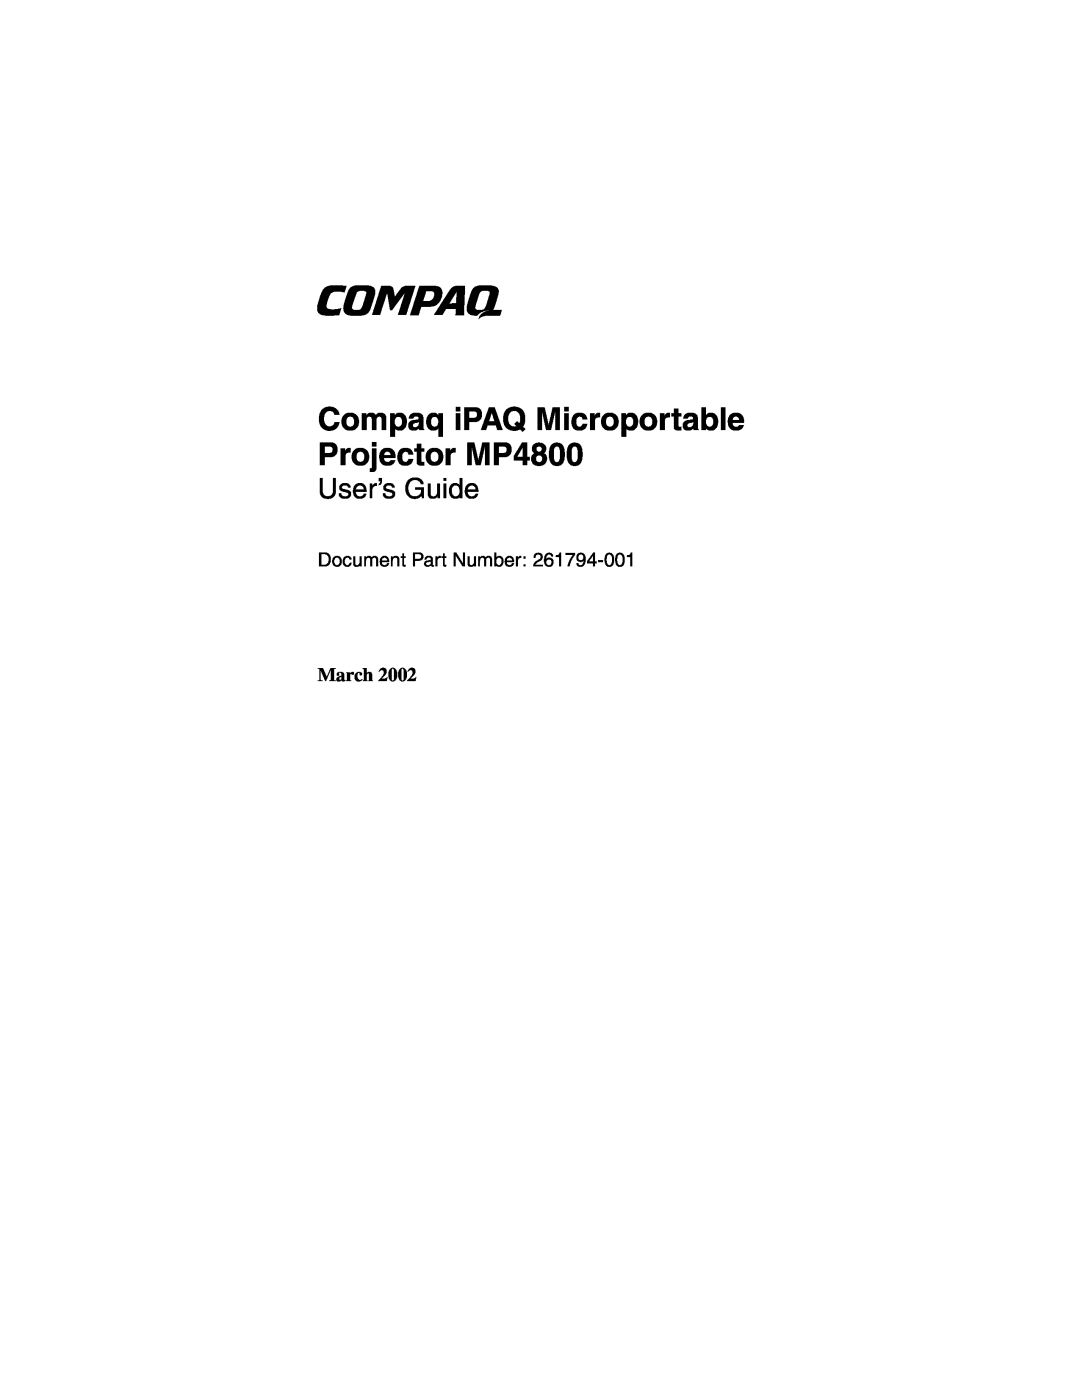 Compaq manual Compaq iPAQ Microportable Projector MP4800, User’s Guide, Document Part Number 